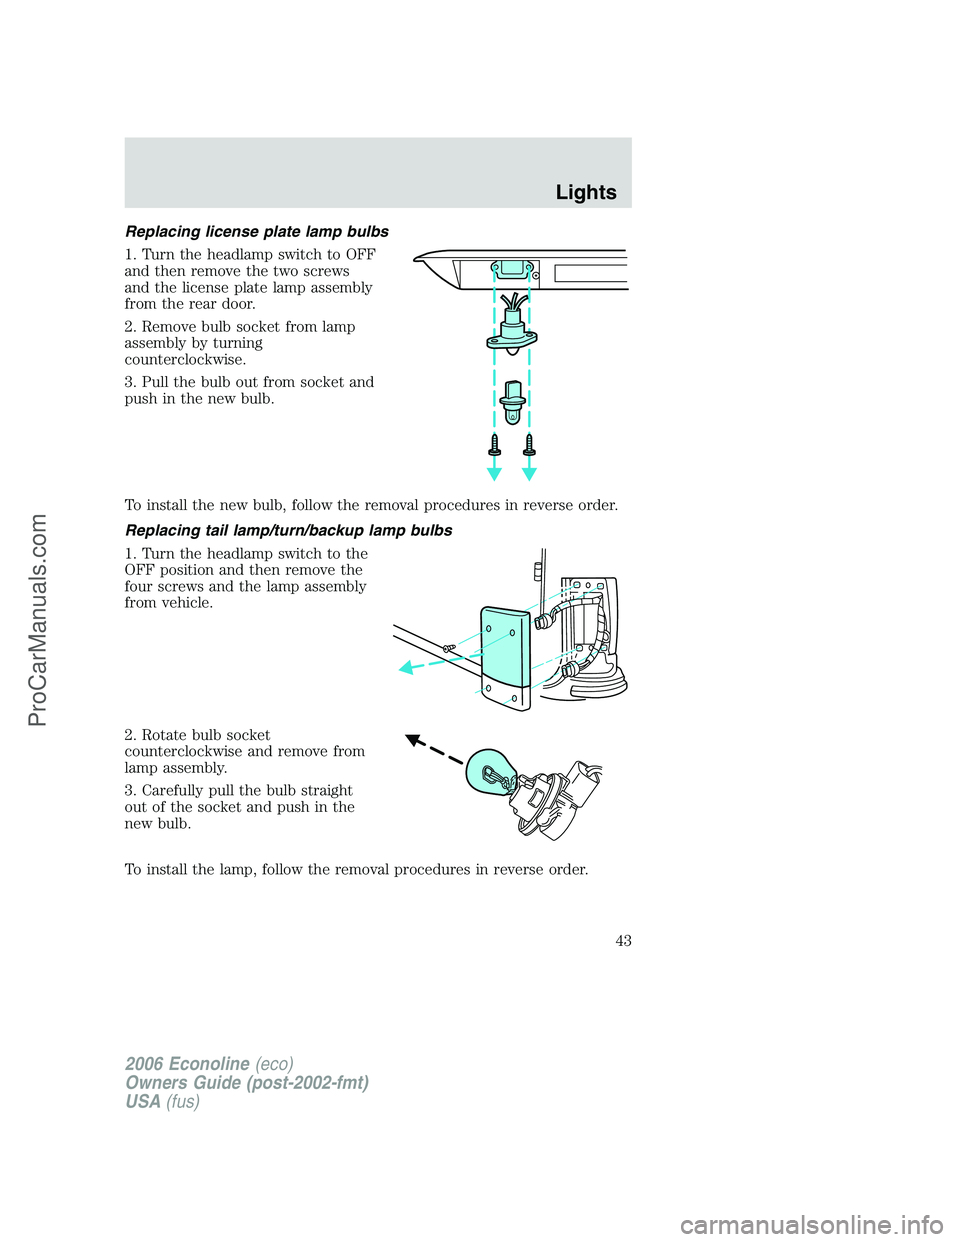 FORD E-150 2006 Service Manual Replacing license plate lamp bulbs
1. Turn the headlamp switch to OFF
and then remove the two screws
and the license plate lamp assembly
from the rear door.
2. Remove bulb socket from lamp
assembly by